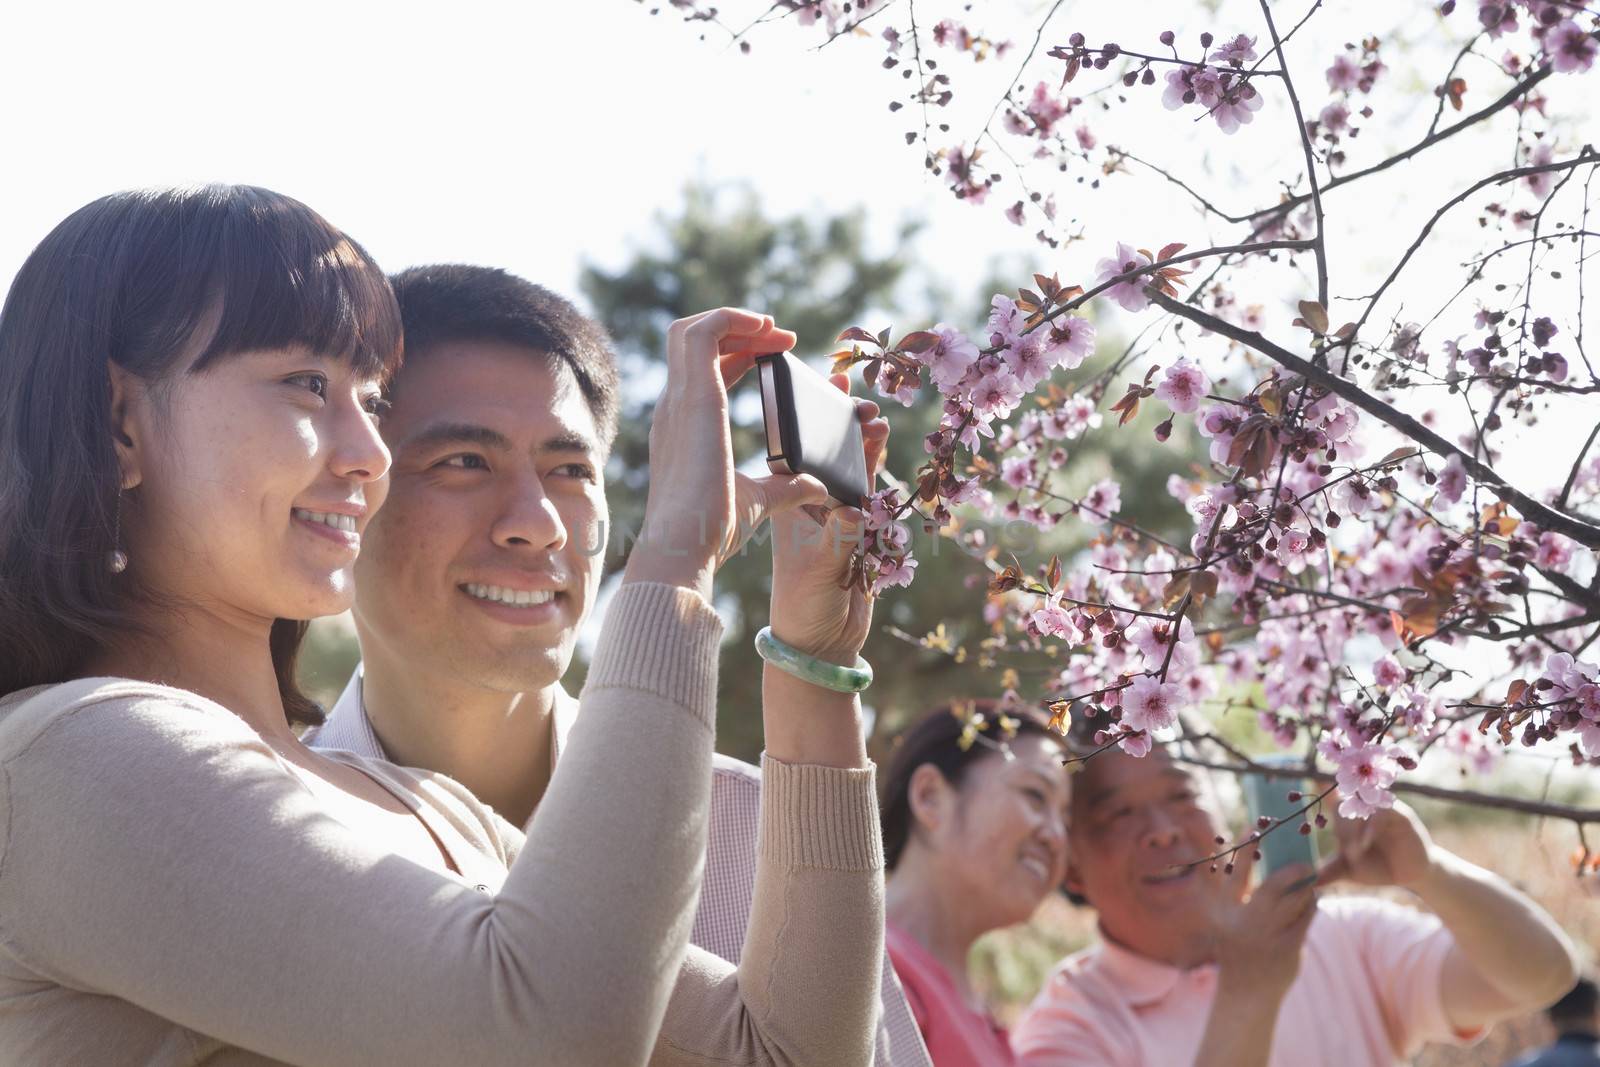 Smiling couple taking a photograph of a branch with cherry blossoms, outside in a park in the springtime by XiXinXing